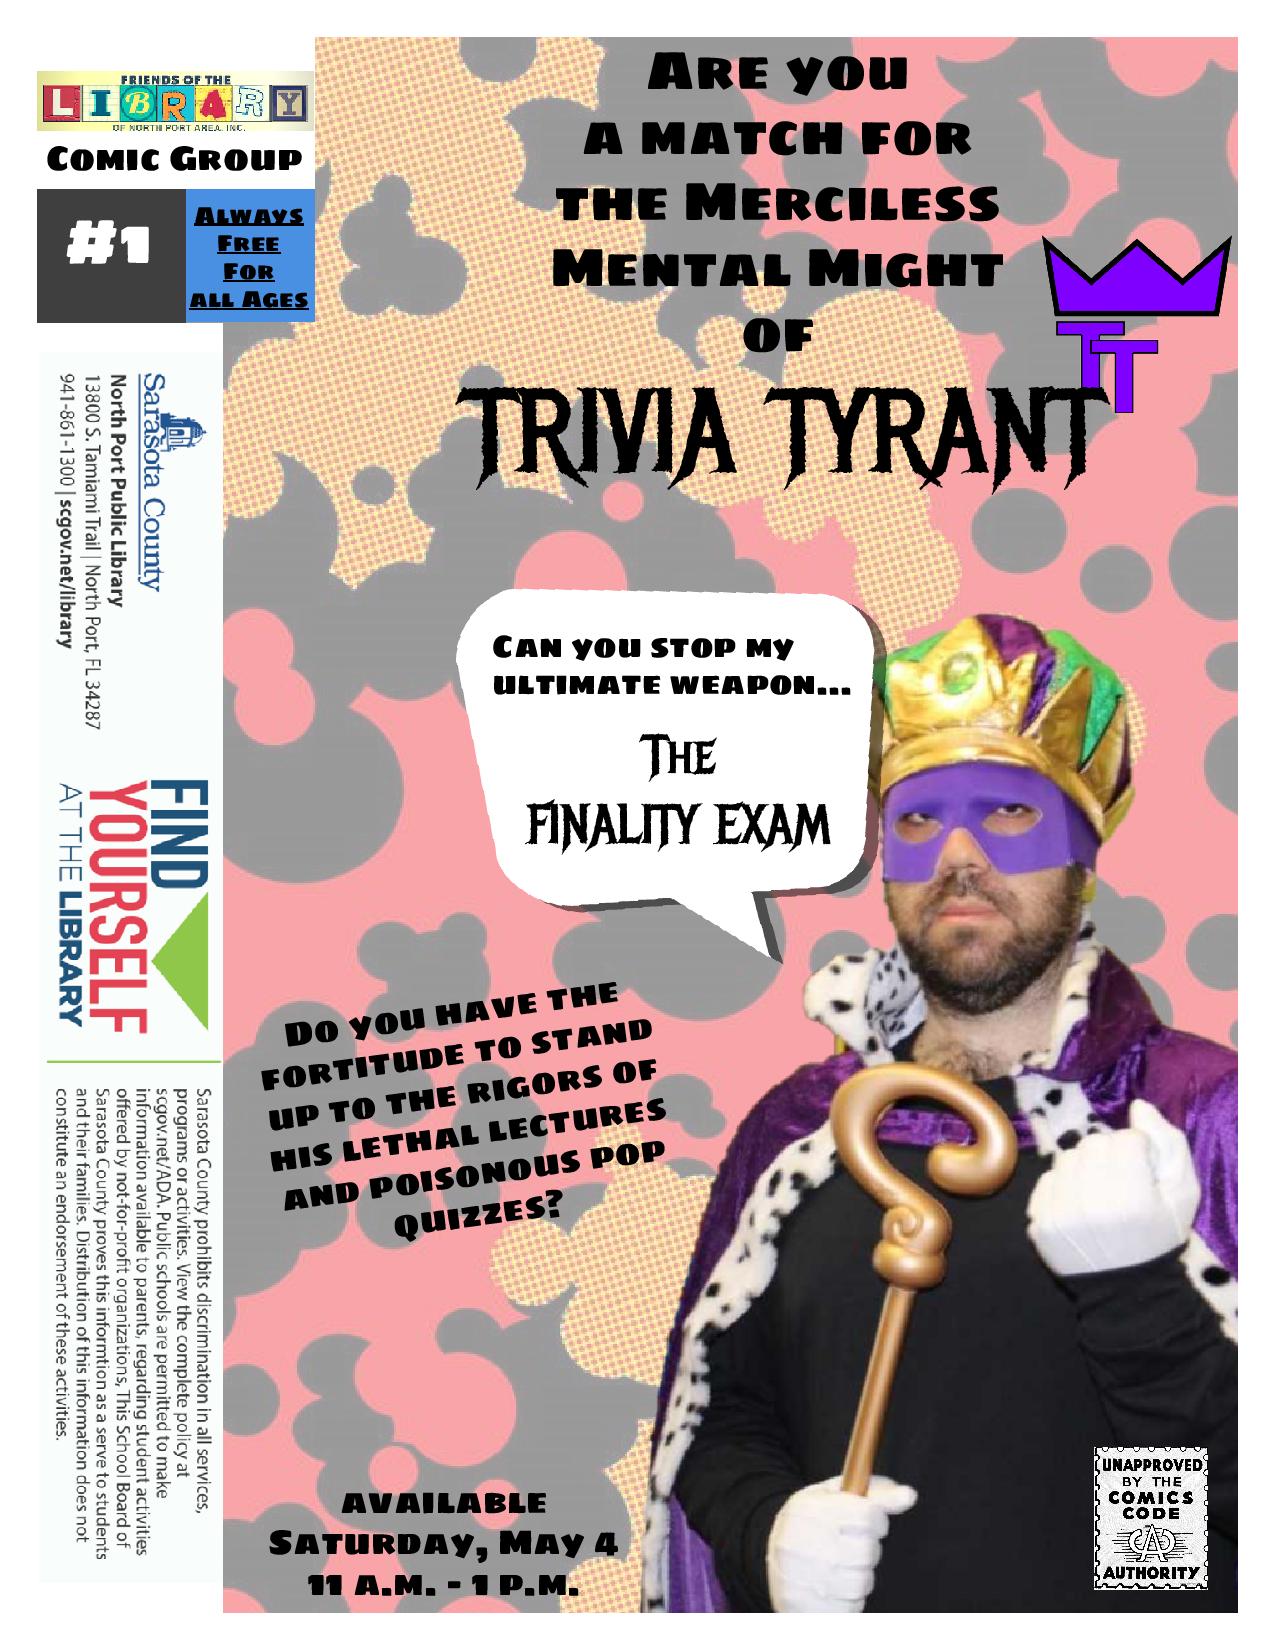 Trivia Tyrant challenges all ages to a battle of wits in the arena of comic knowledge.  Join us 11 a.m. - 1 p.m. on Saturday, May 4.